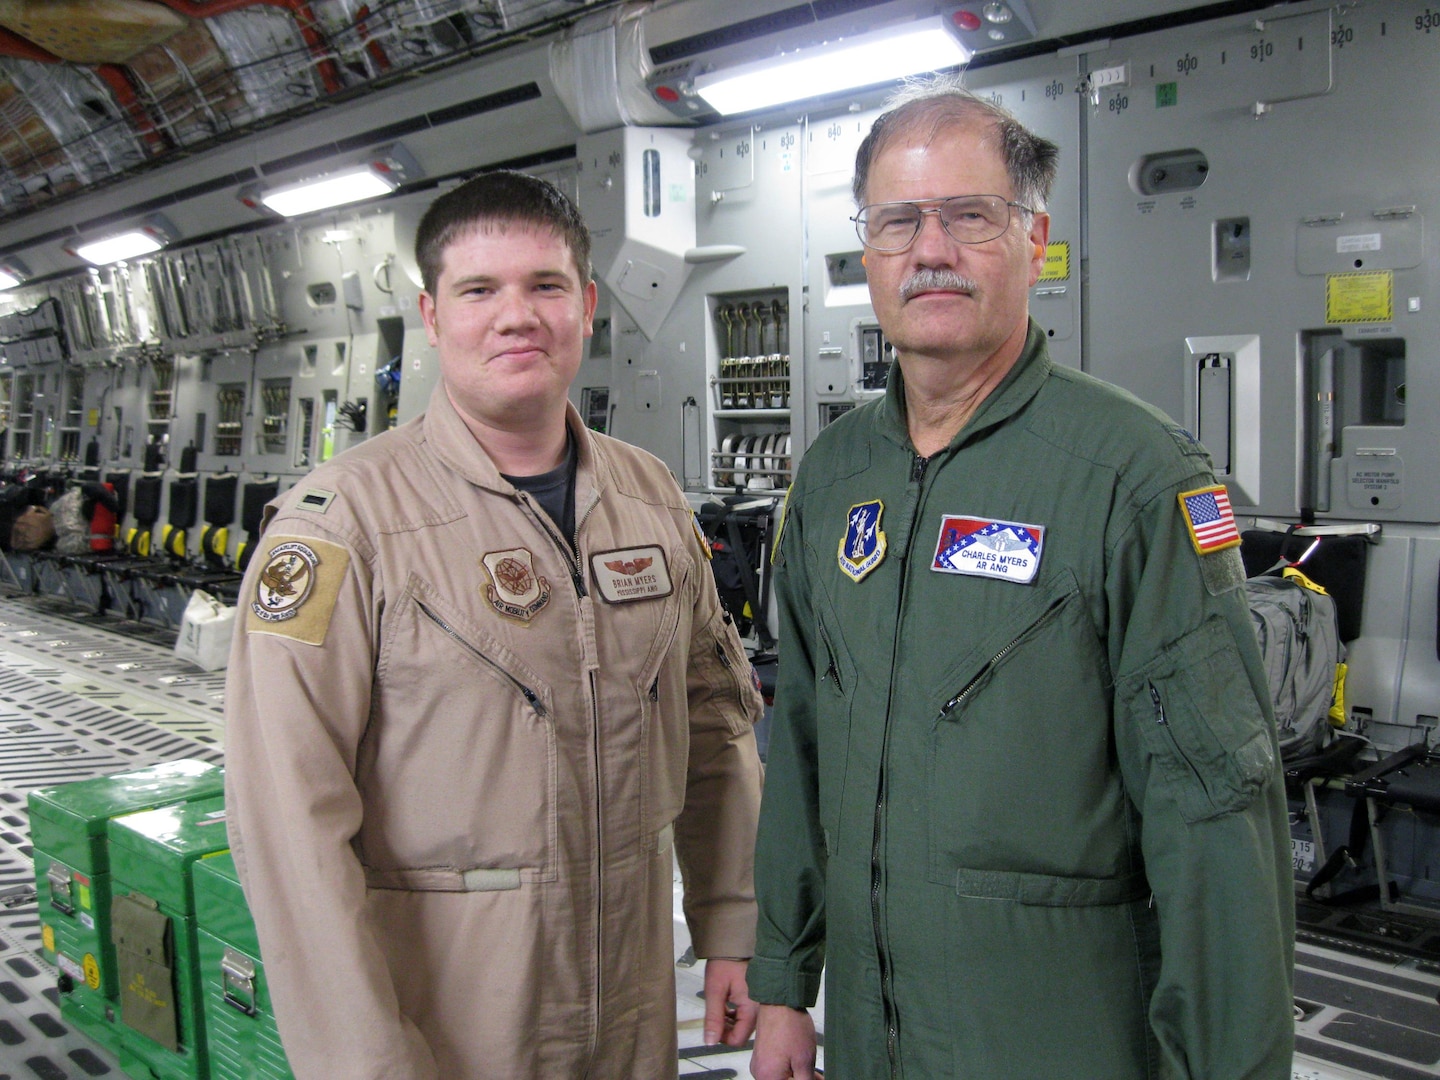 Air Force 1st Lt. Brian Myers, a C-17 Globemaster III pilot, 183rd Airlift Squadron, Mississippi National Guard, and his father, Air Force Col. Charles Myers, state air surgeon for the Arkansas National Guard, pose for a photo after landing at Joint Base Andrews Naval Air Facility in Camp Springs, Md., March 15, 2011. The father-and-son duo had the opportunity to work alongside one another as part of the Air Guard CCATT mission.